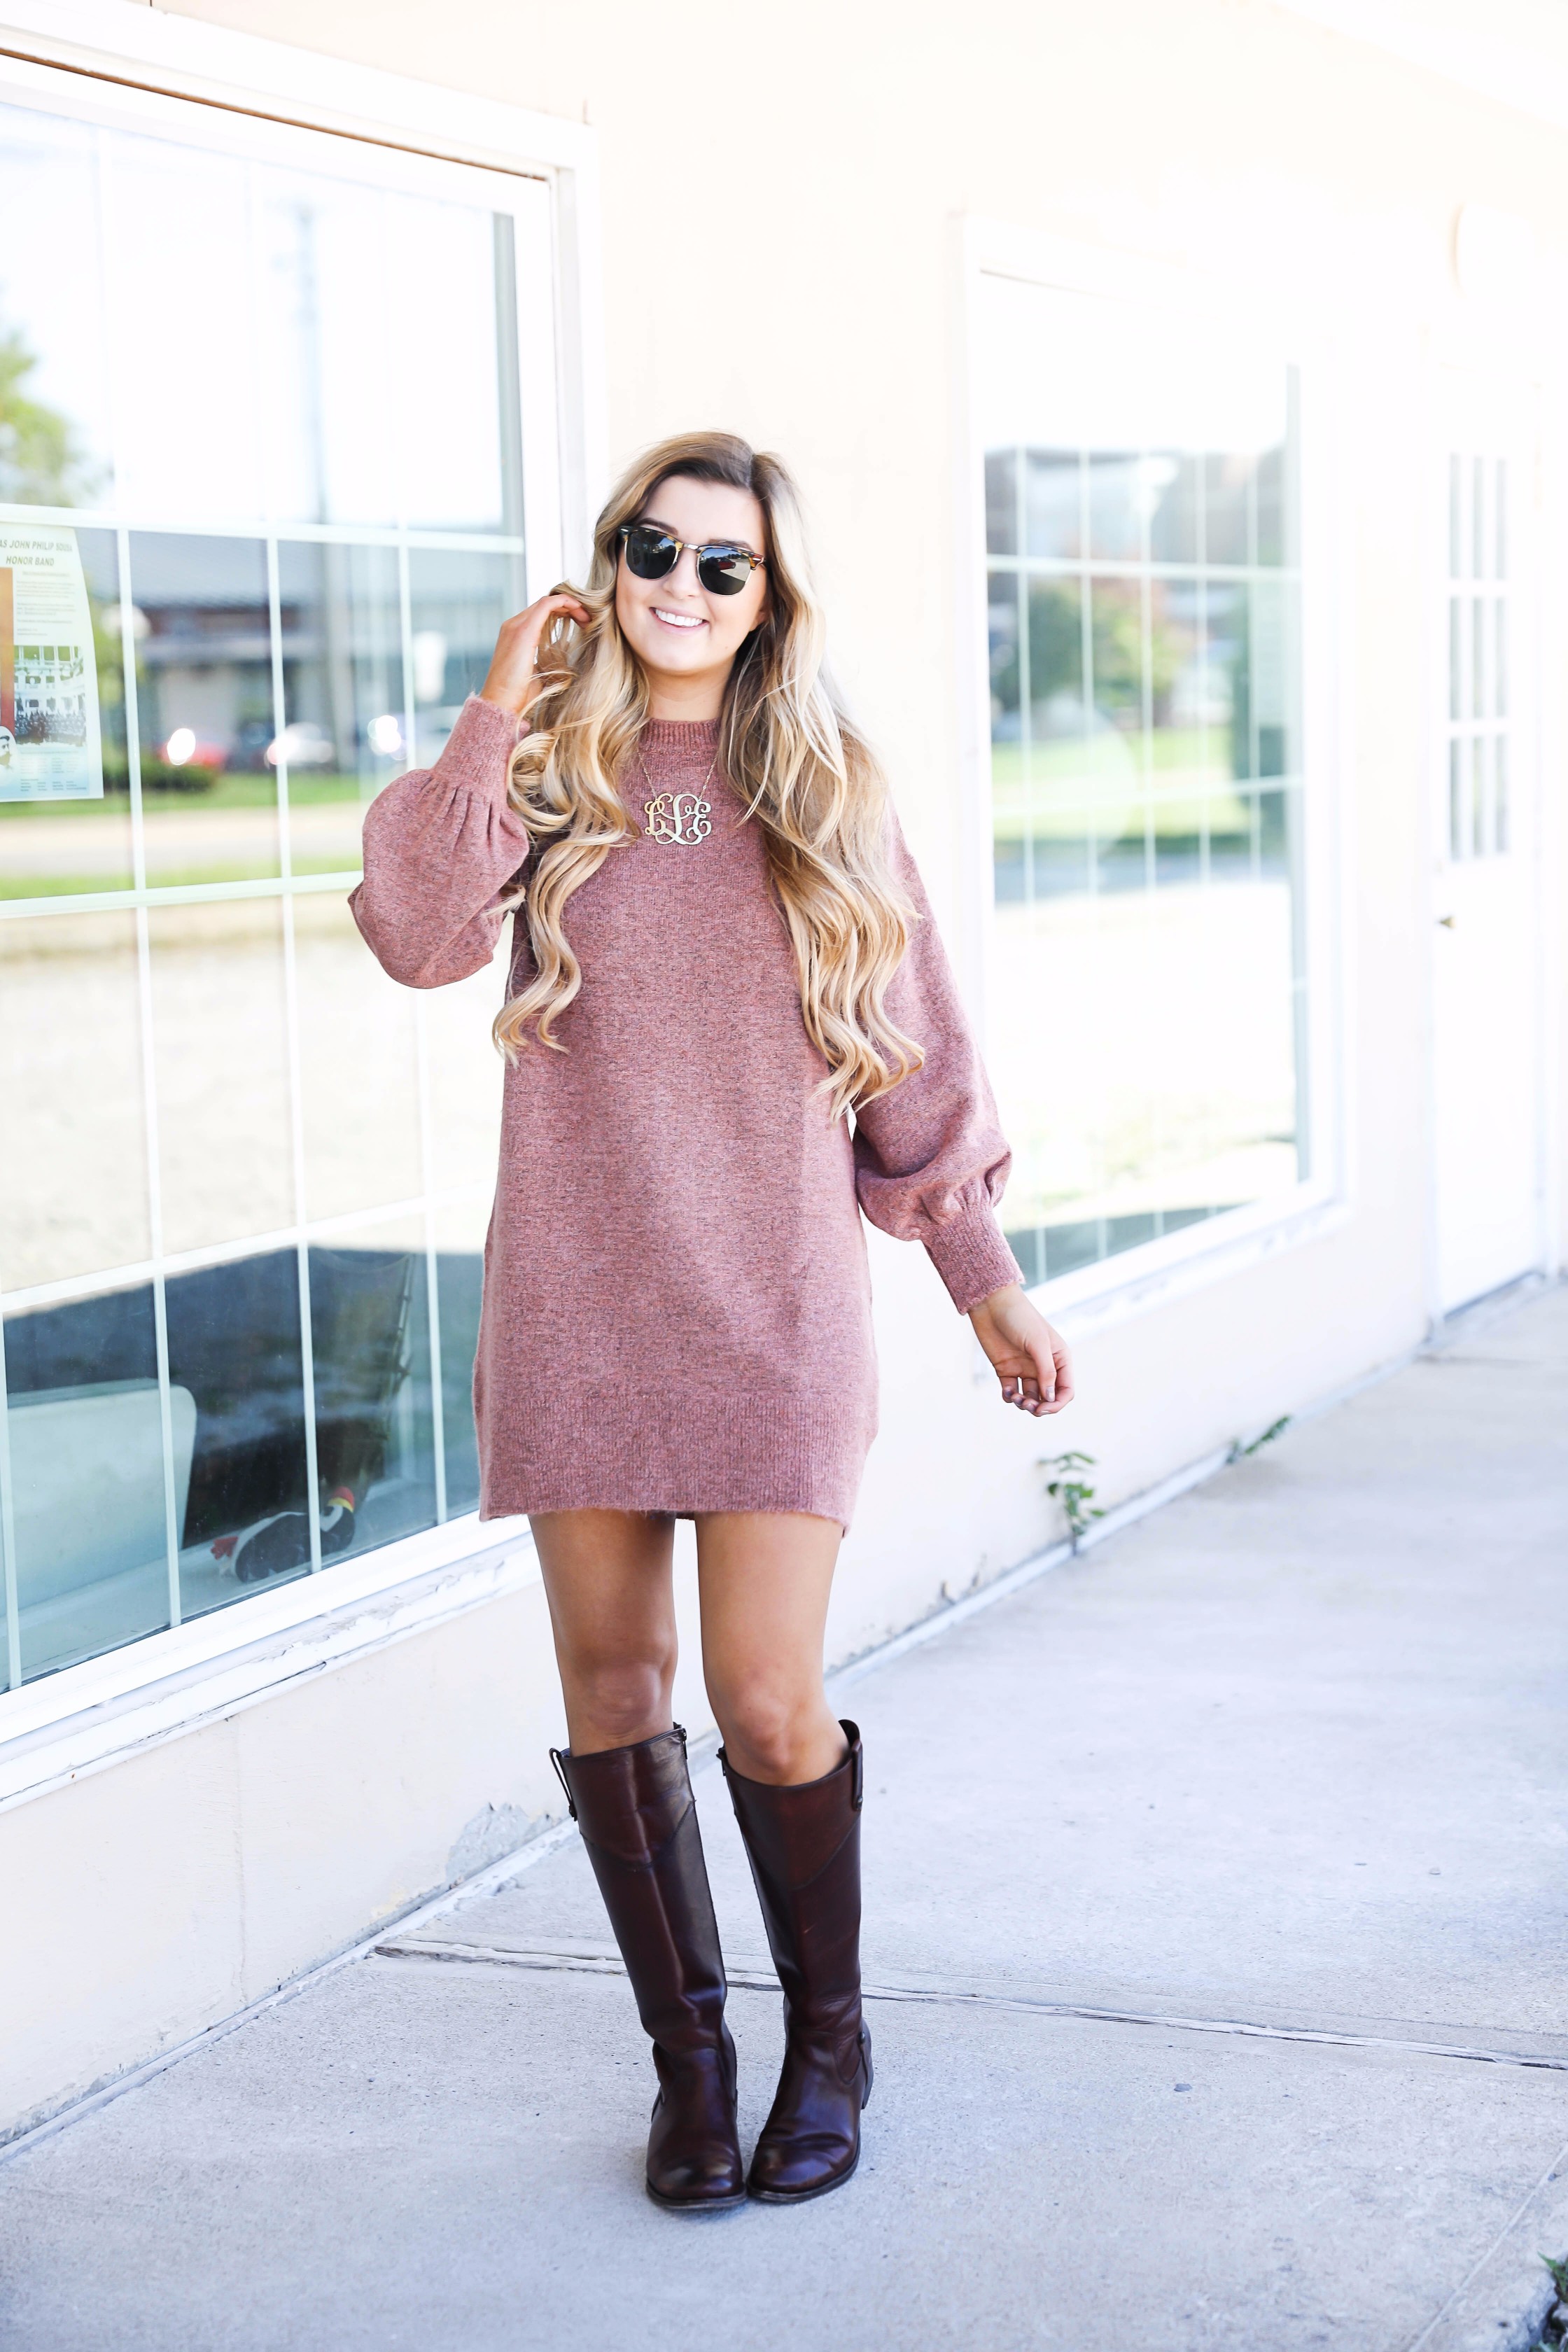 sweater dress with leggings and boots - By Lauren M